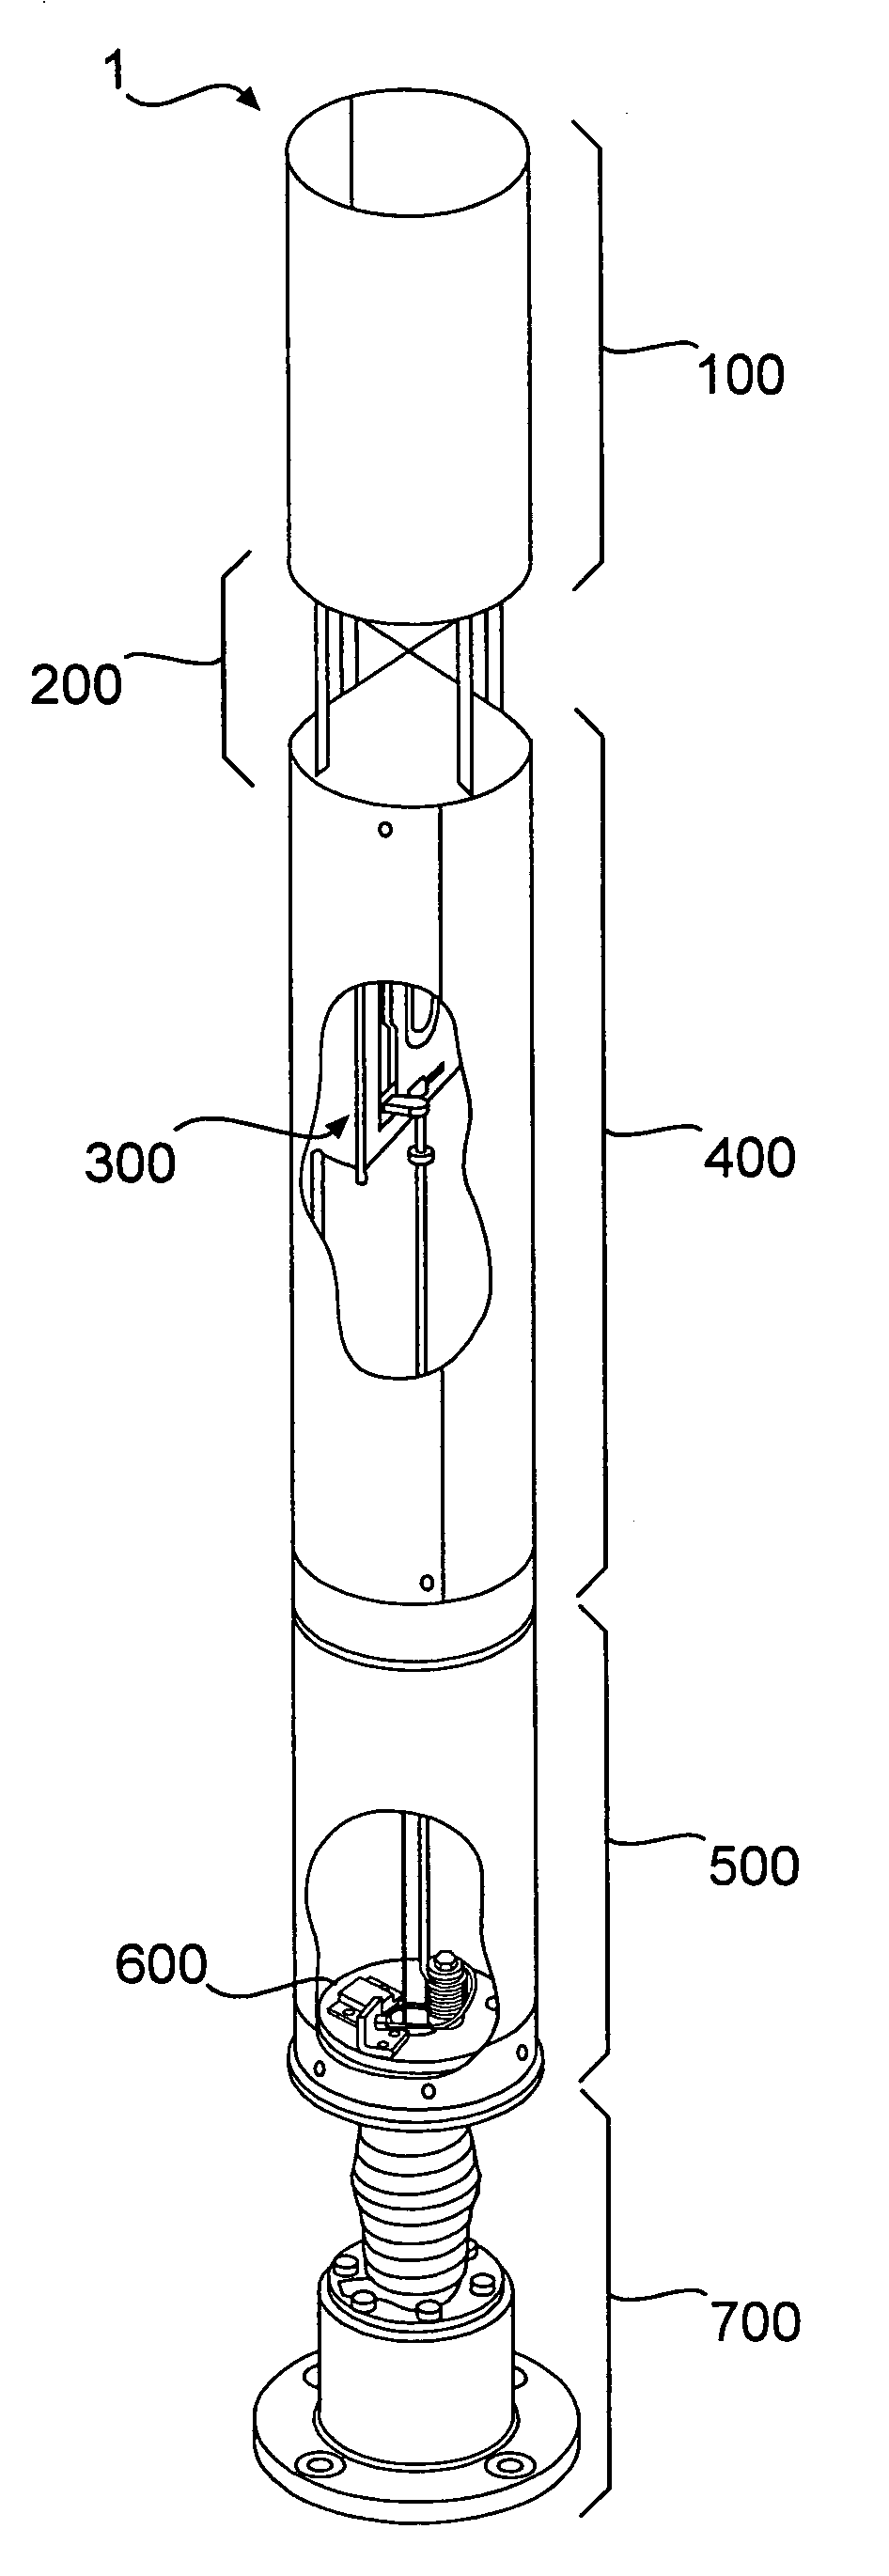 Ultra-broadband antenna system combining an asymmetrical dipole and a biconical dipole to form a monopole